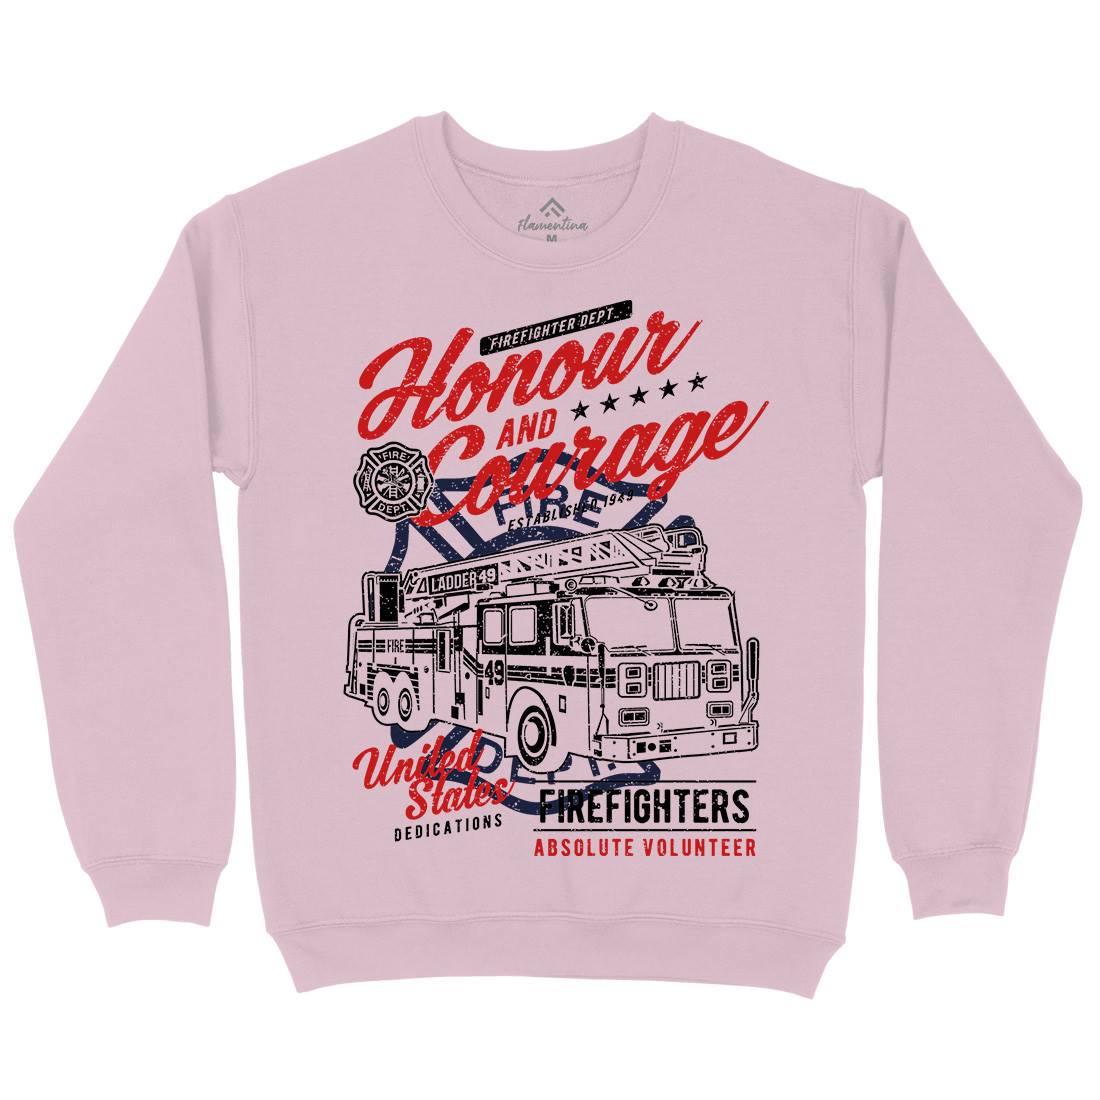 Honour And Courage Kids Crew Neck Sweatshirt Firefighters A684